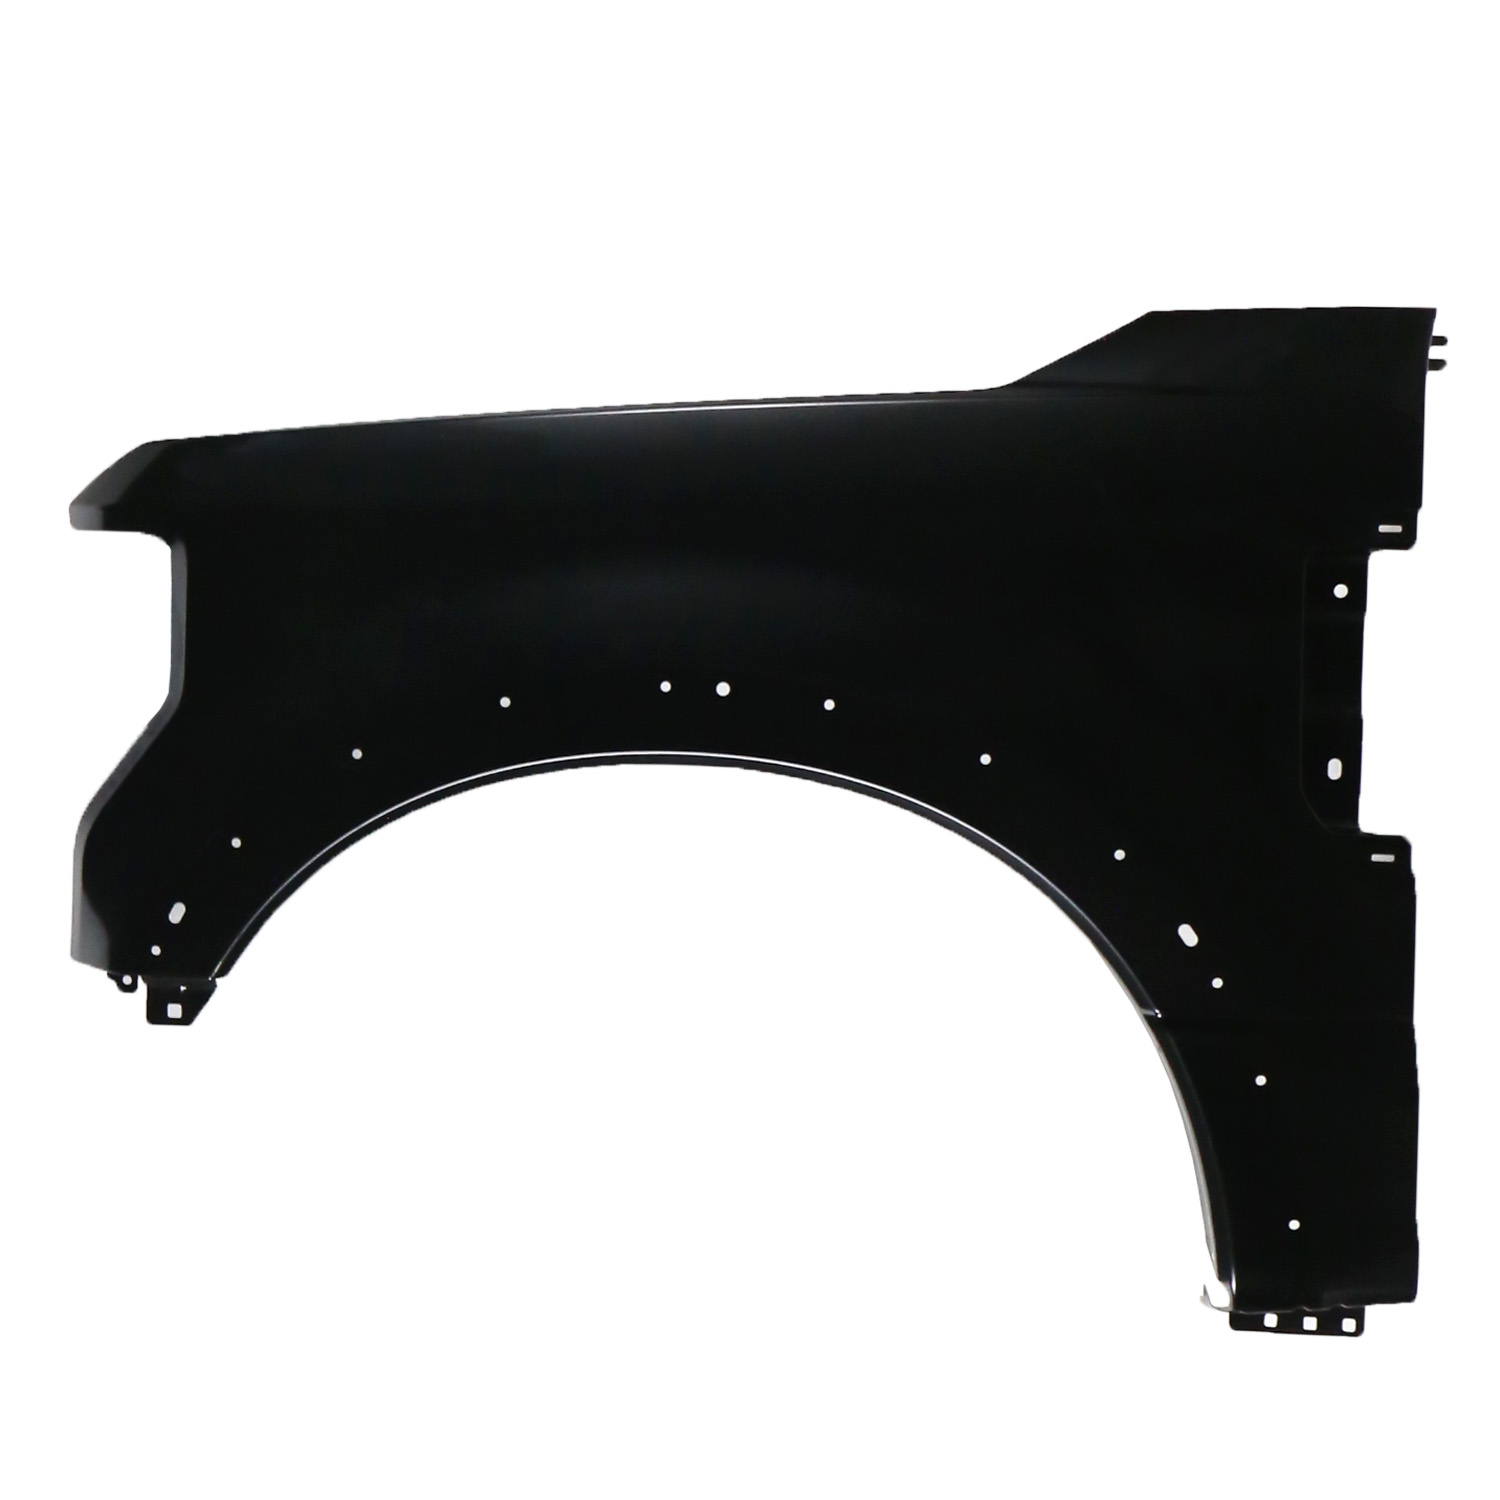 Aftermarket FENDERS for FORD - F-250 SUPER DUTY, F-250 SUPER DUTY,17-19,LT Front fender assy